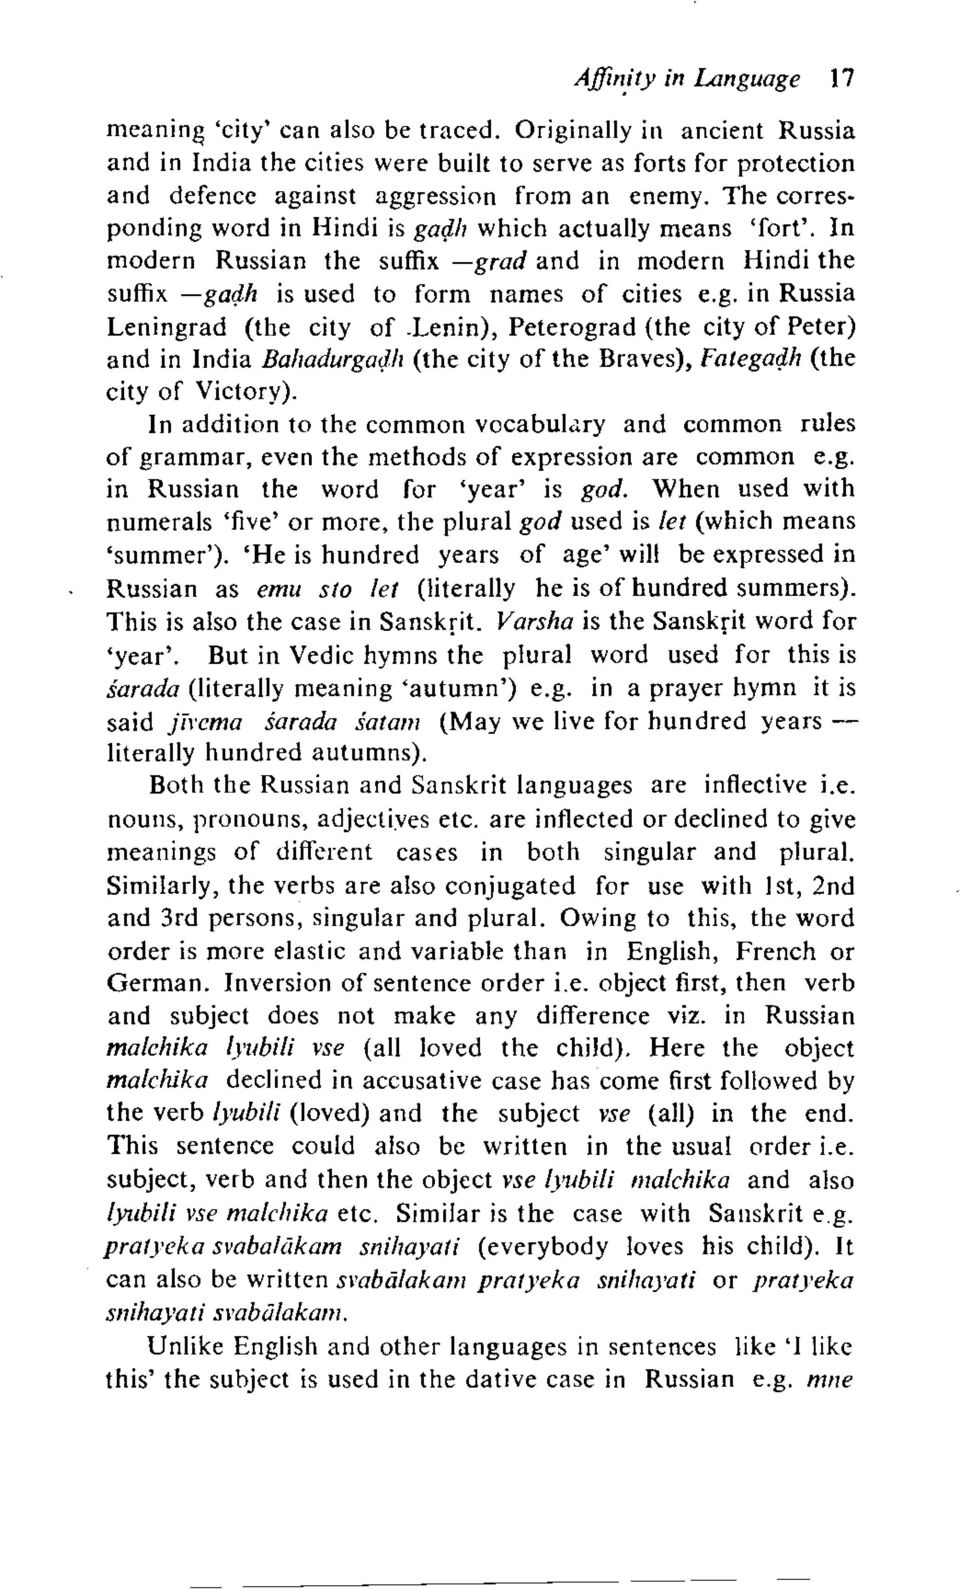 In addition to the common vocabulary and common rules of grammar, even the methods of expression are common e.g. in Russian the word for year is god.